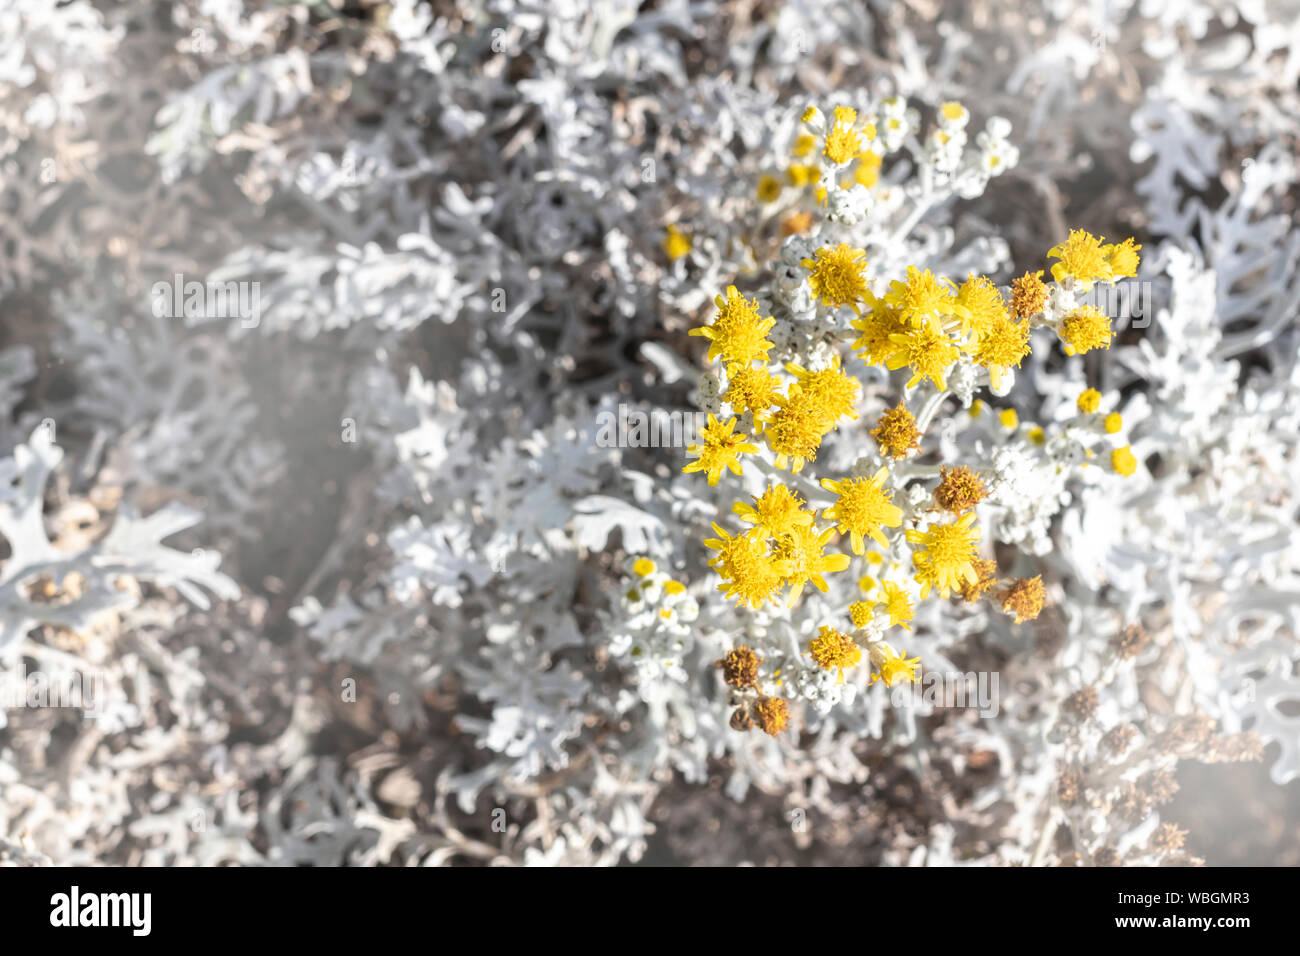 Beautiful Dusty miller (Senecio cineraria DC.) with yellow flowers in the garden. Soft focus Cineraria maritima silver dust leaves background. Stock Photo